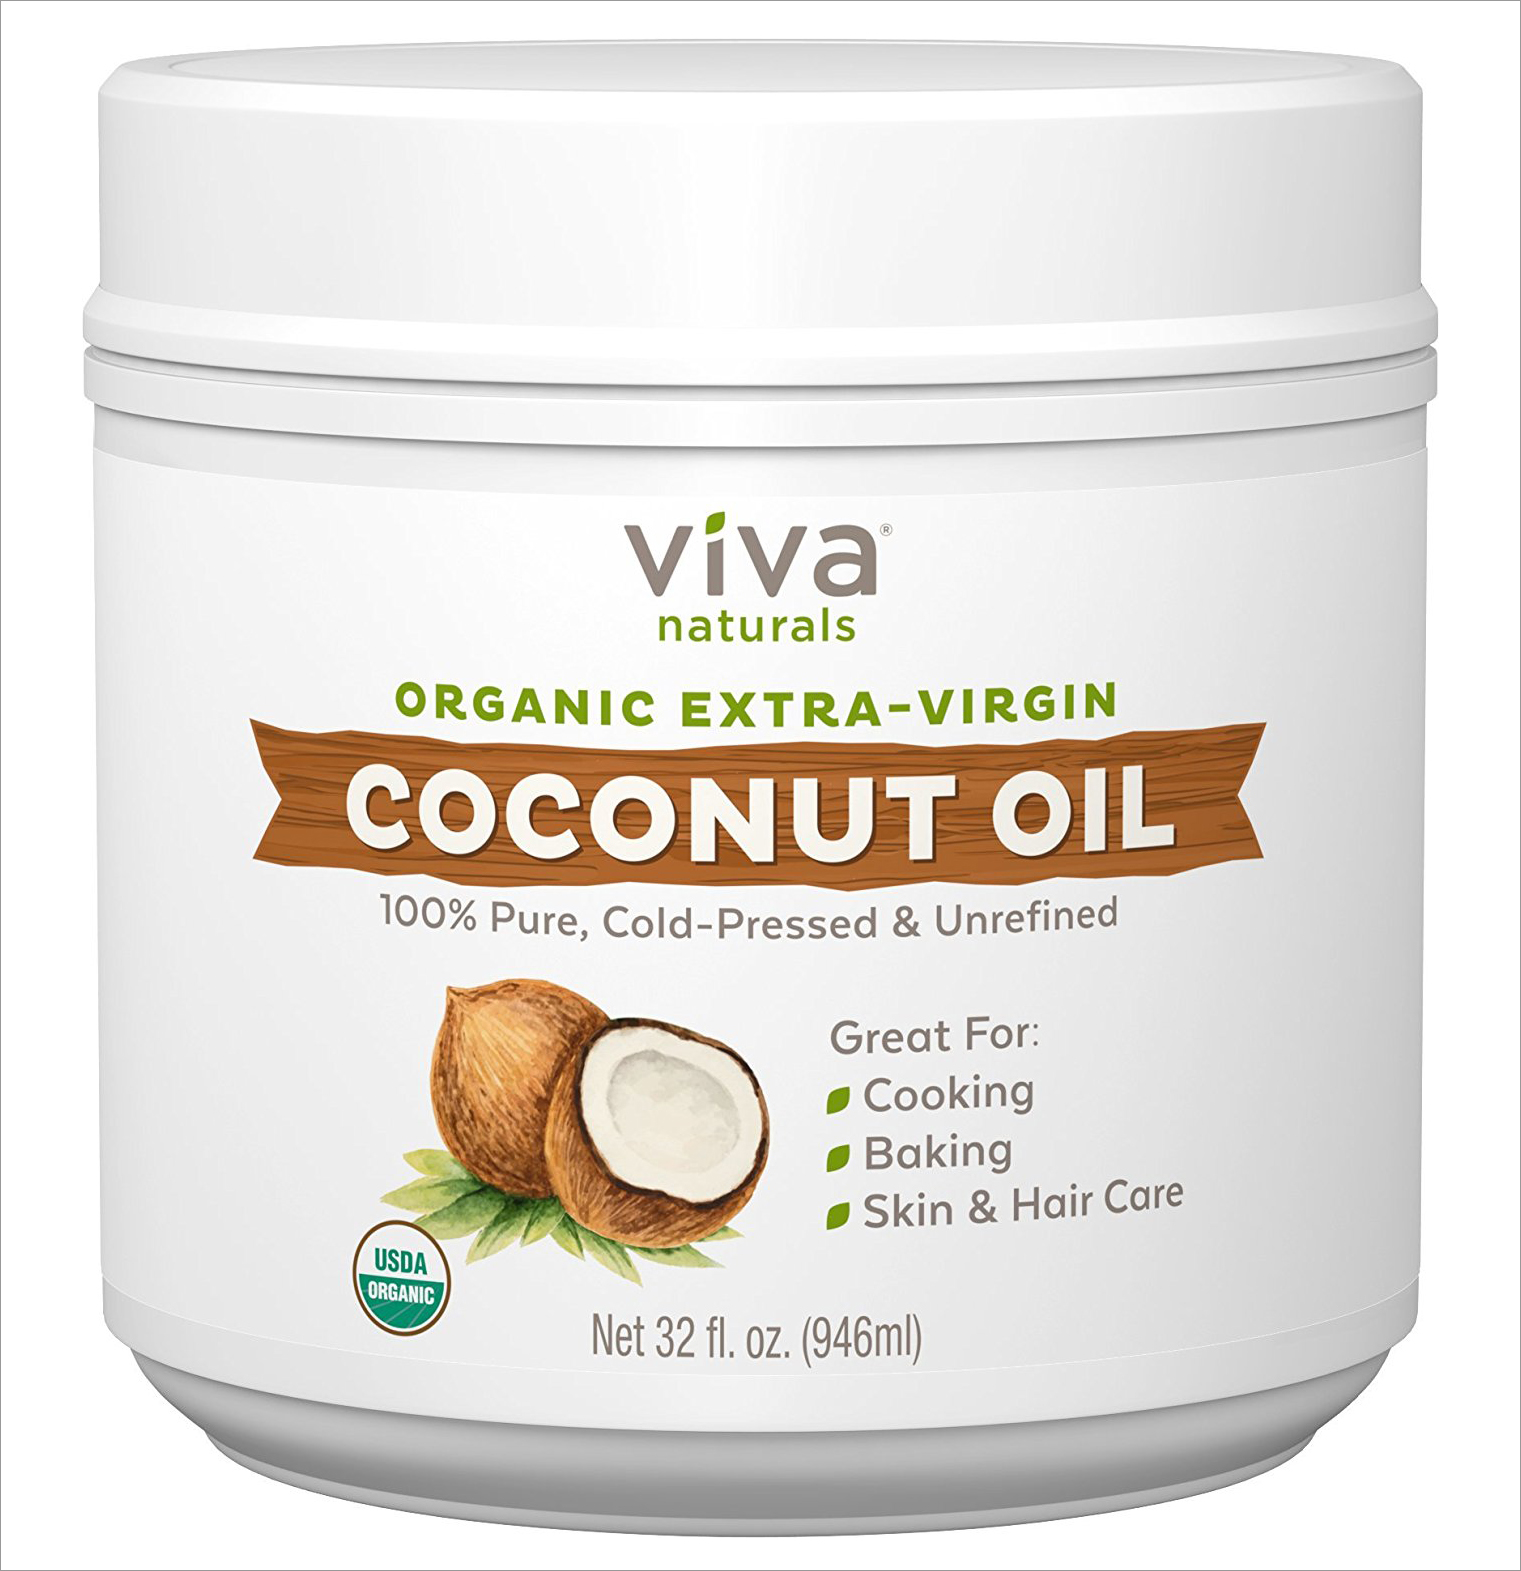 VIVA Organic Extra-Virgin Coconut Oil - Amazon skin care best seller in their skin and hair care categories